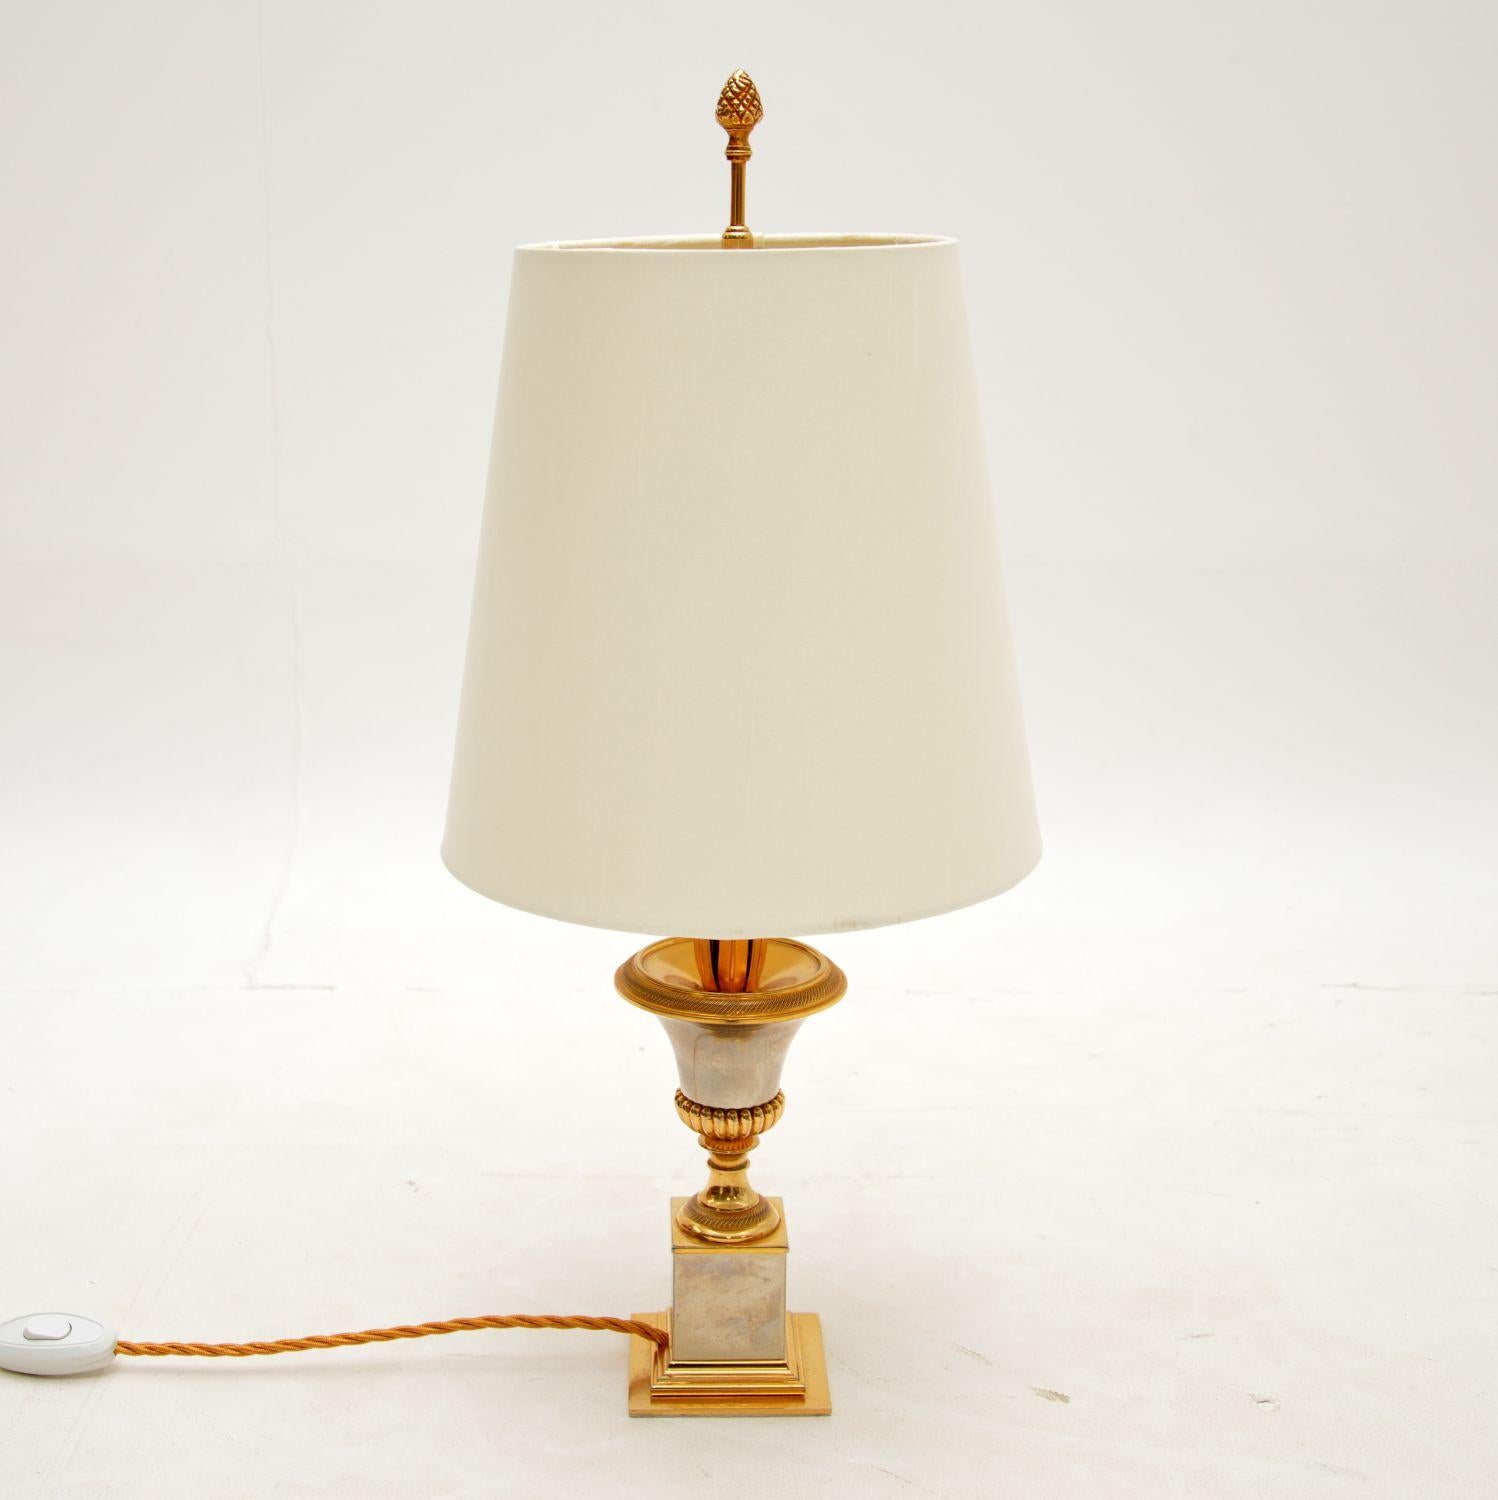 A beautiful original vintage brass table lamp, made in France around the 1960’s.

This is of amazing quality and has an absolutely gorgeous design. It is finished in brass and chrome, with an urn shaped base, splayed reeds leaves and an acorn